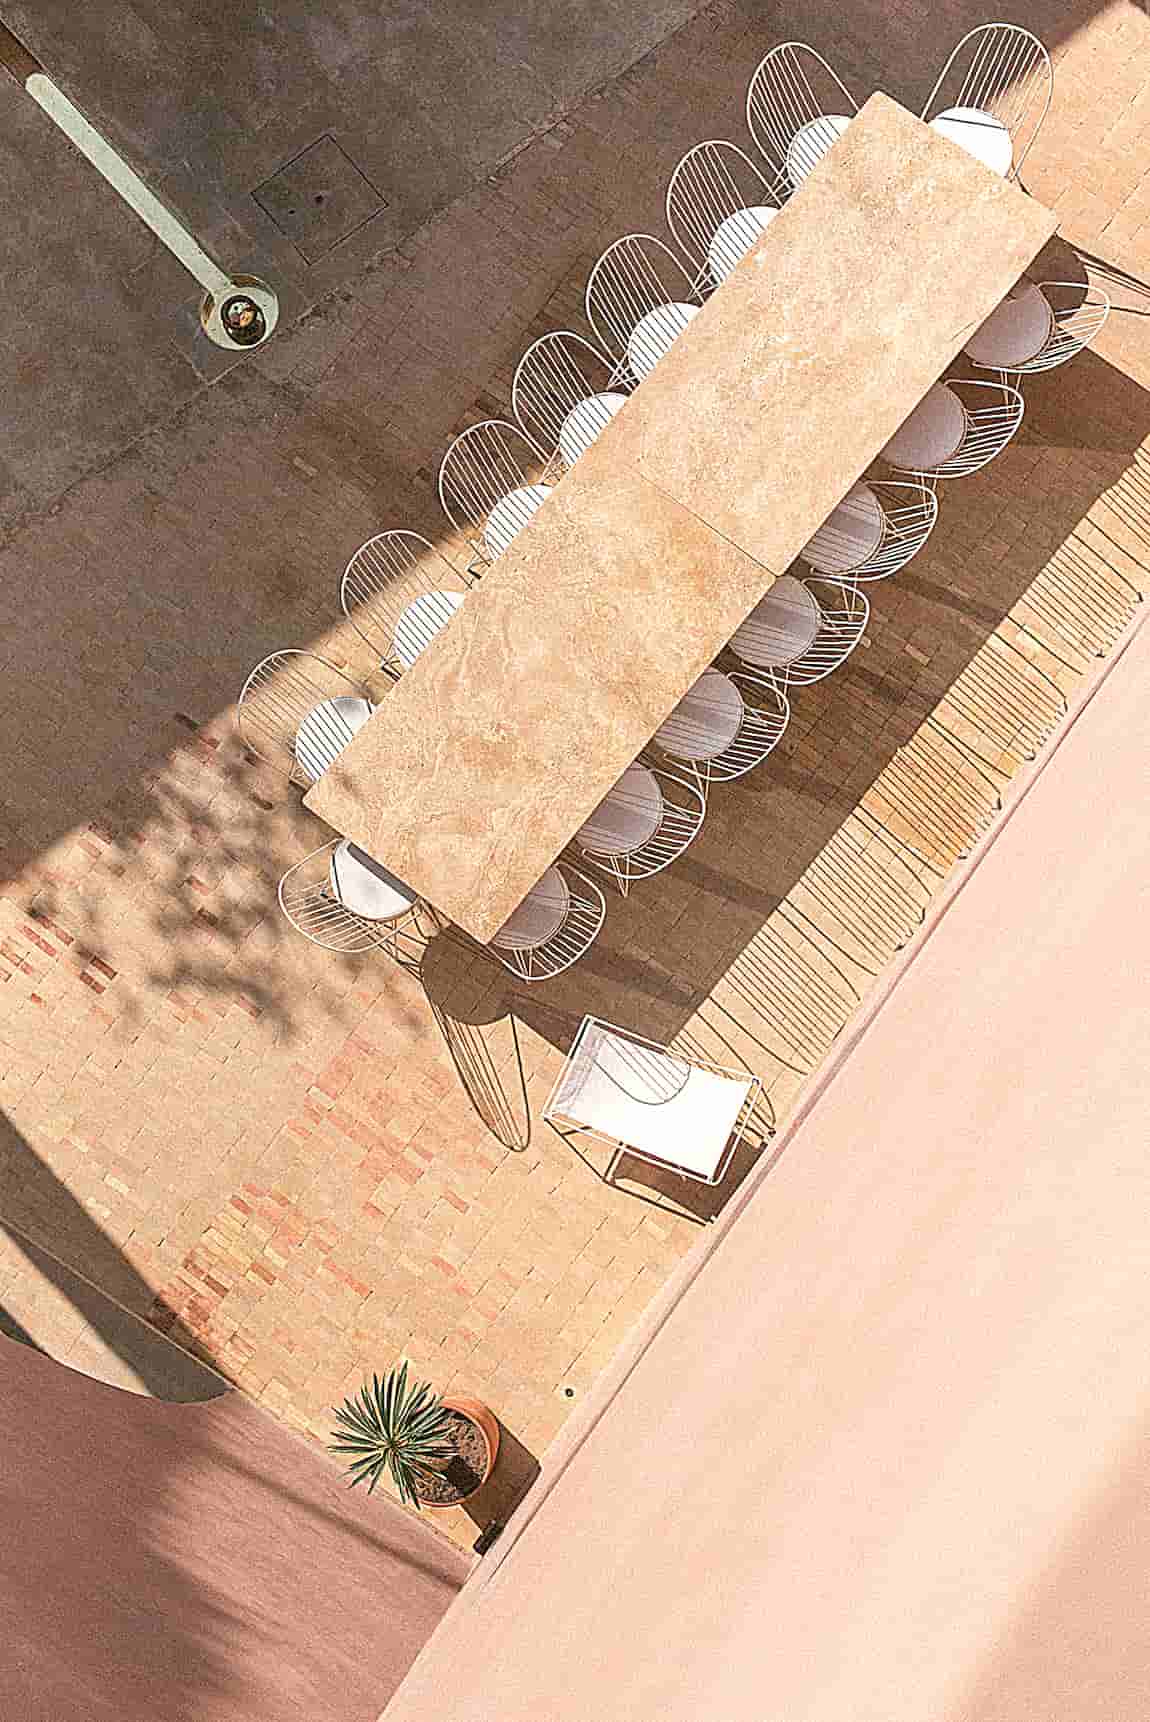 Maison Brummell Majorelle: A Boutique Hotel in Morocco Channels Marrakesh's Role as a Cultural Melting Pot